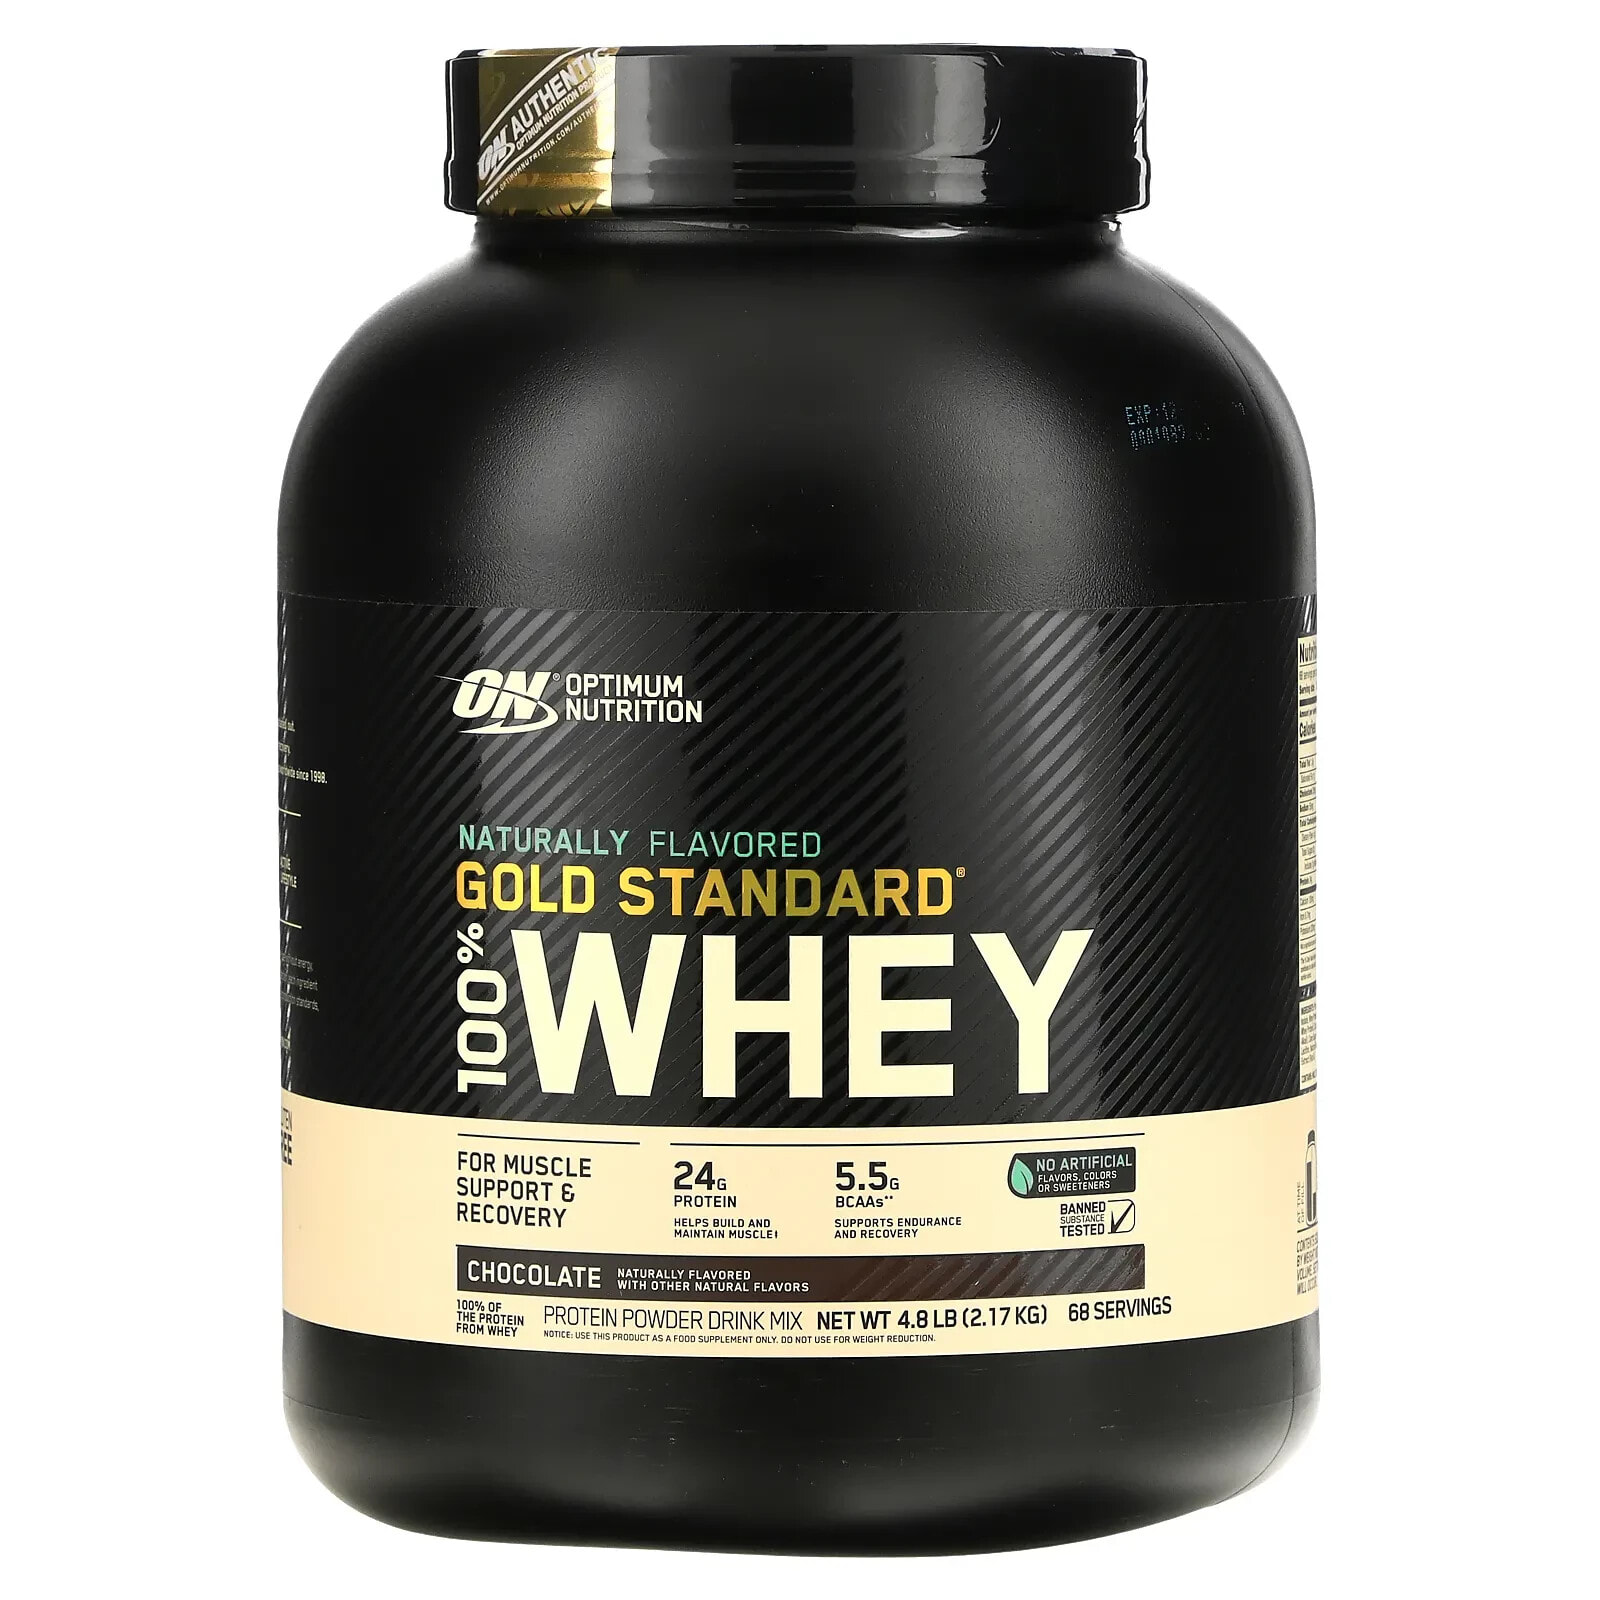 Gold Standard 100% Whey, Naturally Flavored, Vanilla, 4.8 lb (2.17 kg)